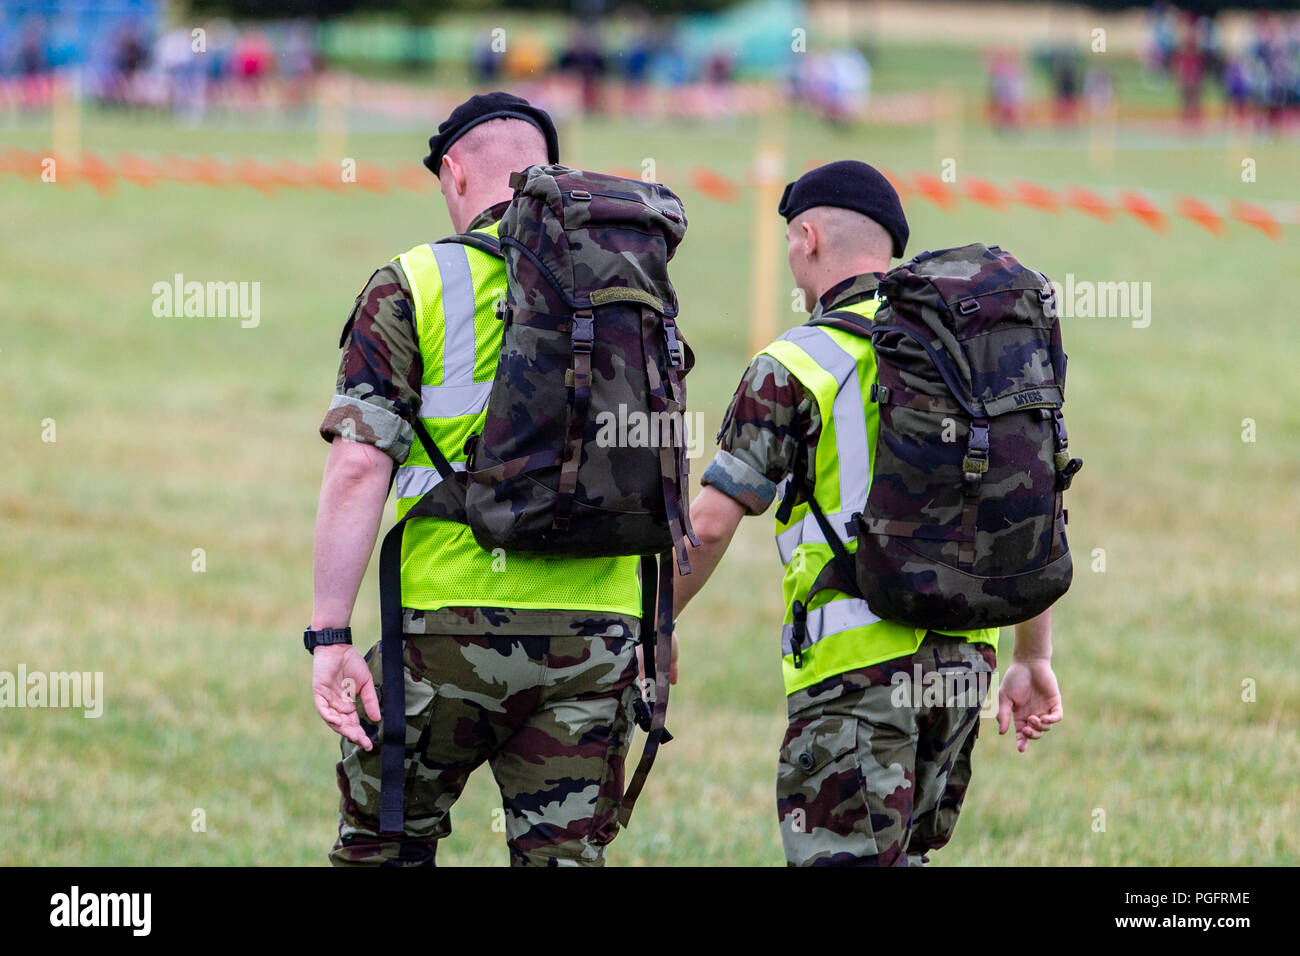 Dublin, Ireland. 26 August 2018. Worshipers arriving at phoenix park in Dublin for the Closing mass of His Holiness Pope Francis two day visit to Ireland Credit: Bonzo/Alamy Live News Stock Photo